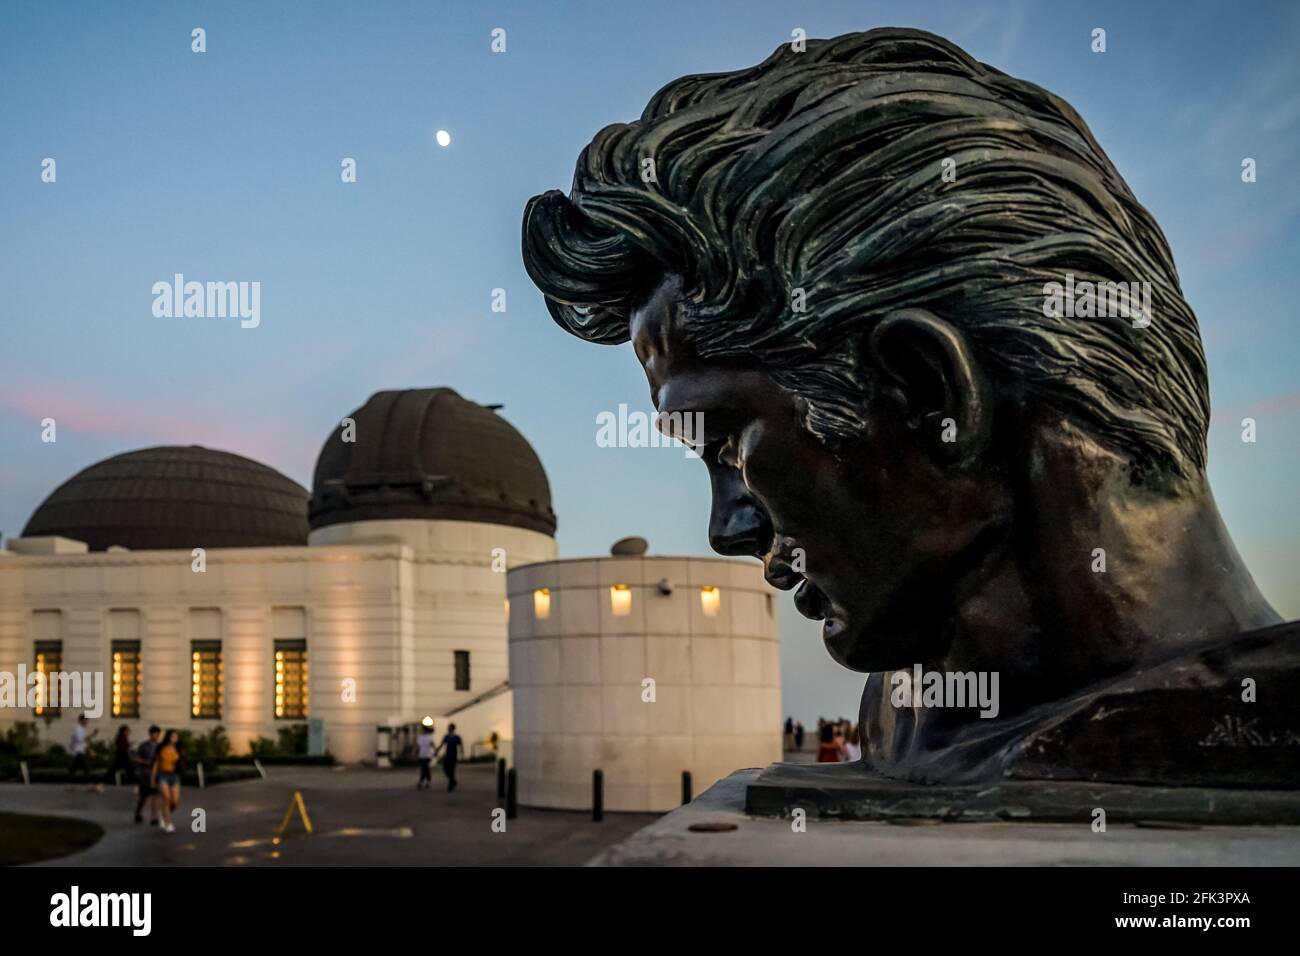 The bust of James Dean at the Griffith Observatory in Los Angeles looking down on the evening visitors Stock Photo